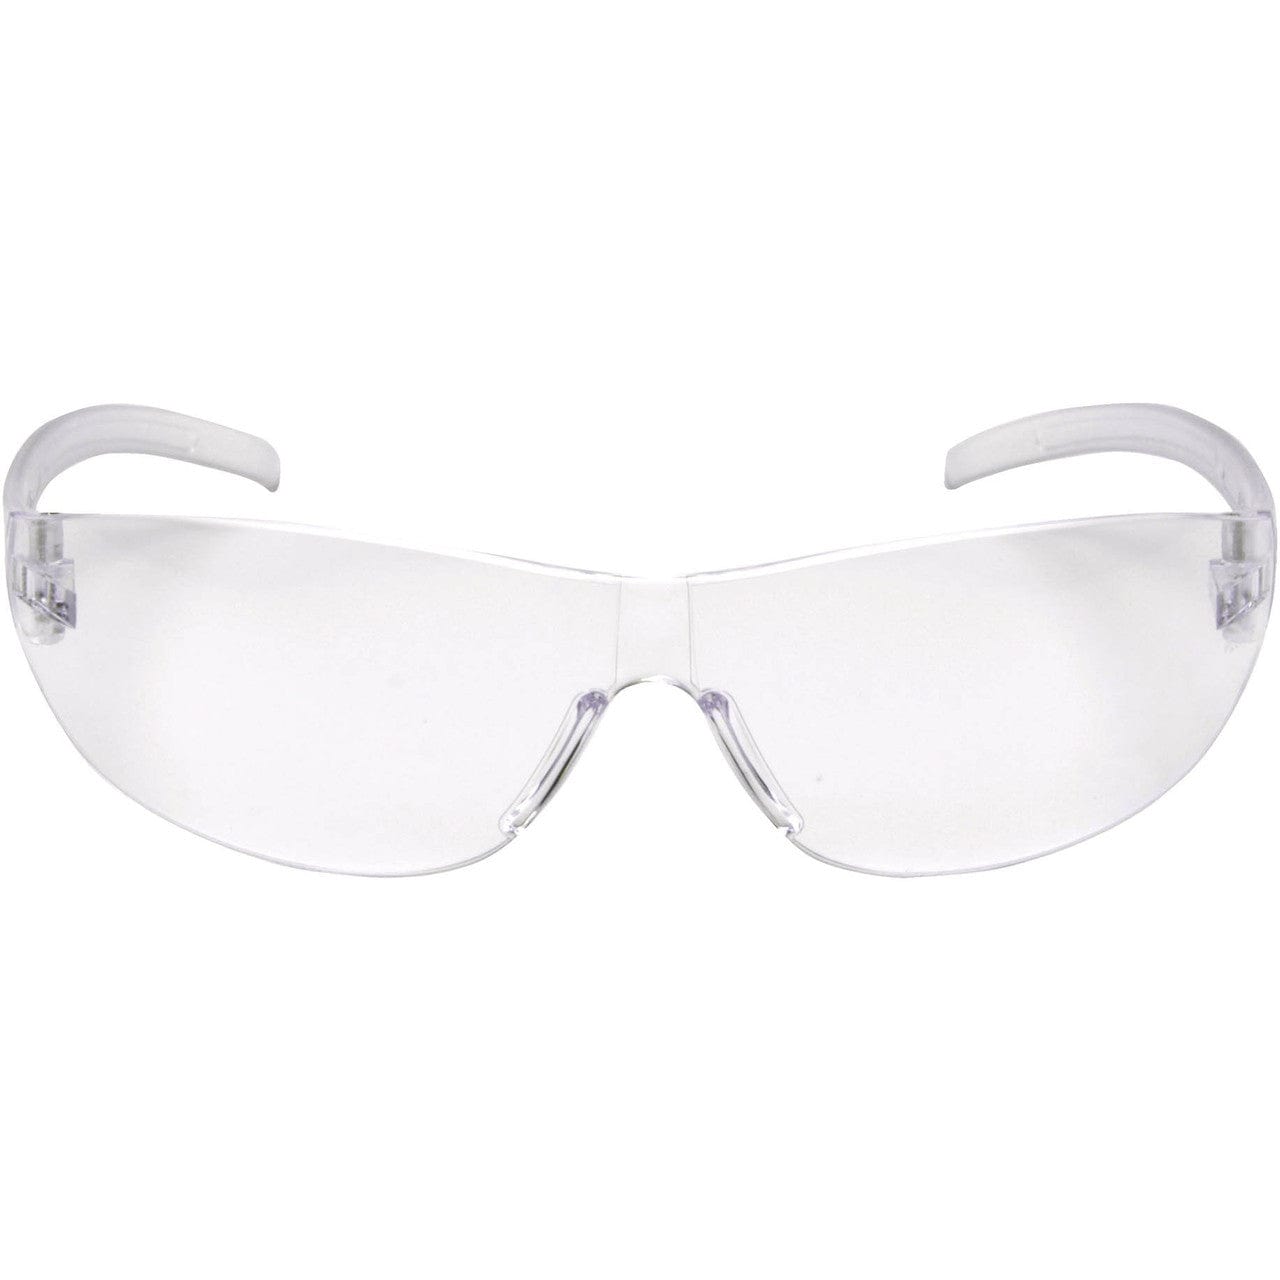 Pyramex Alair Safety Glasses with Clear Anti-Fog Lens S3210ST Front View